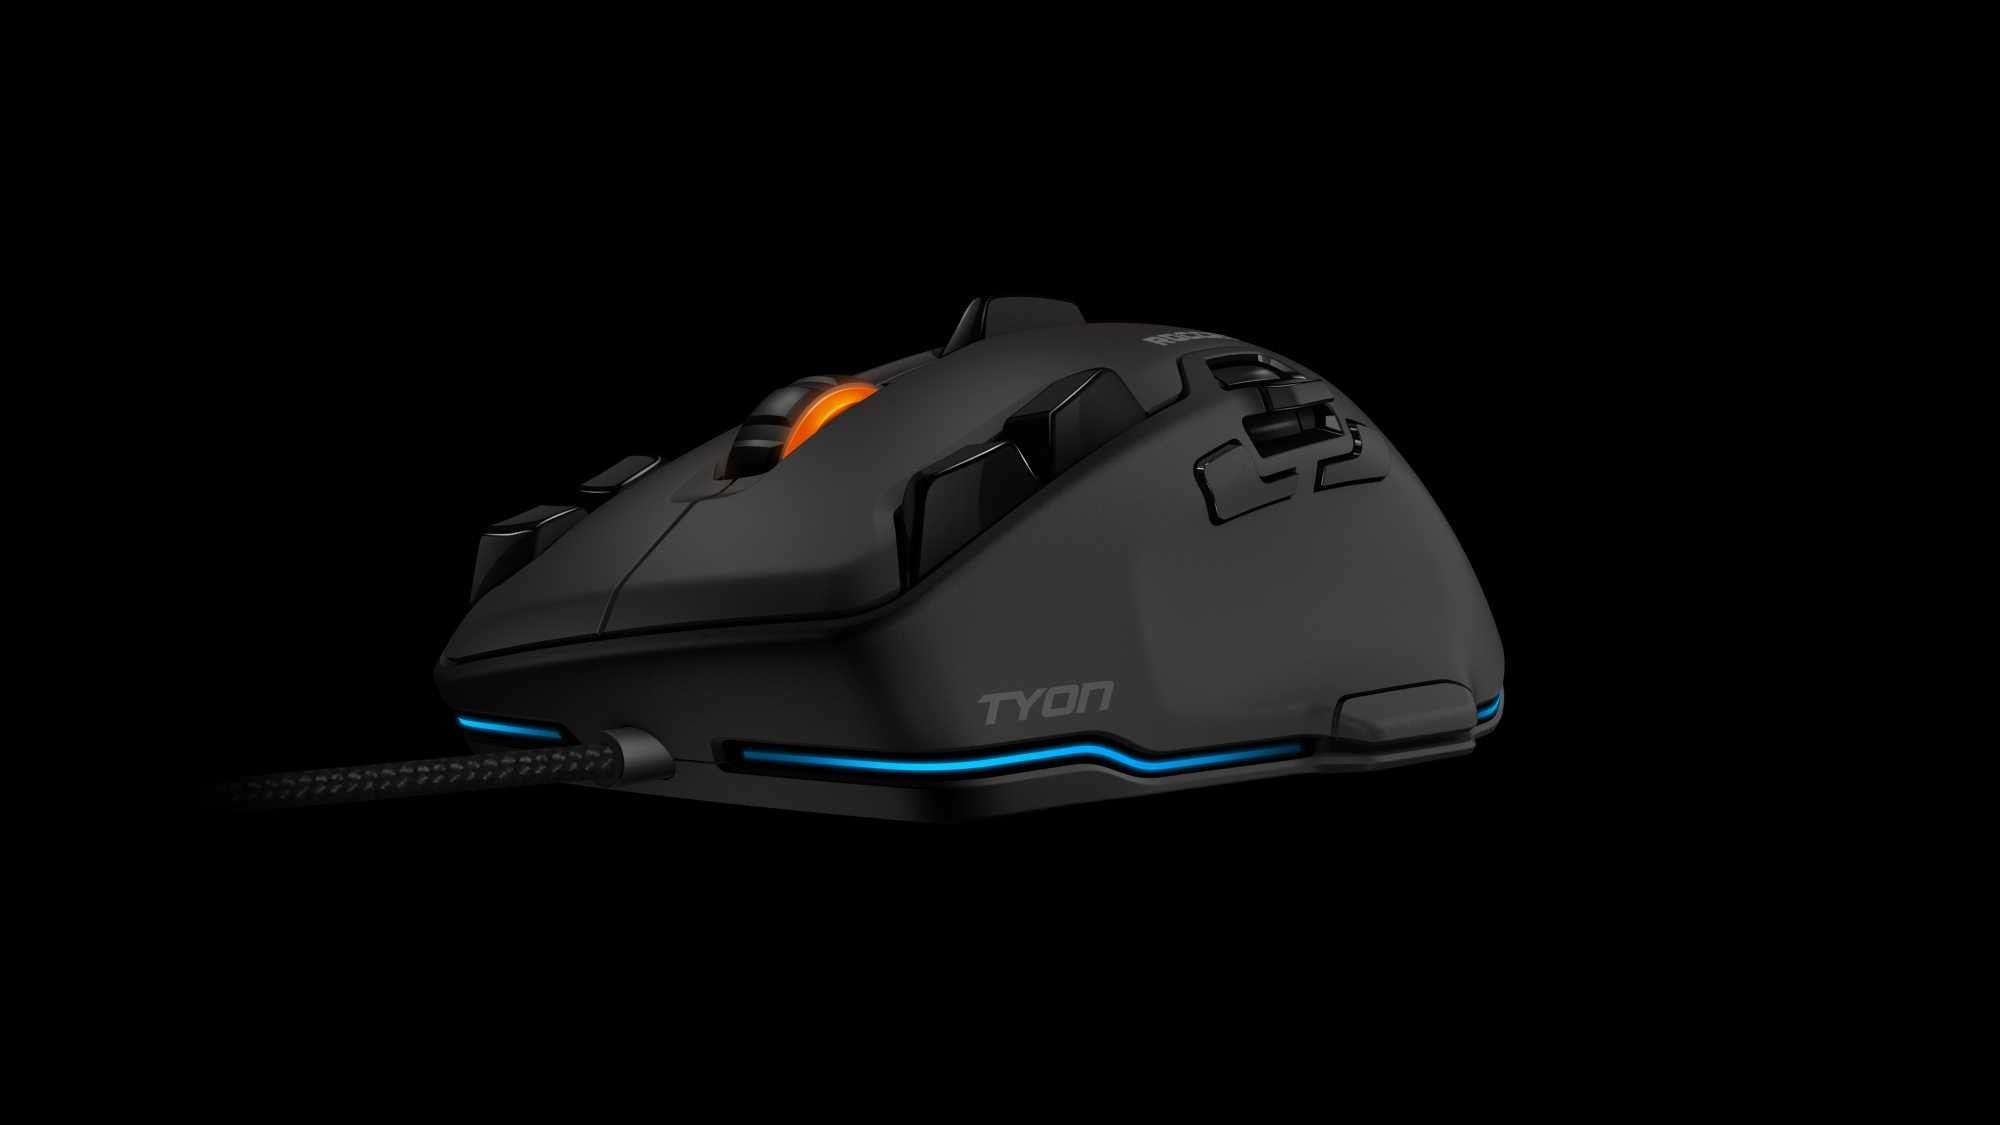 2000x1125 ROCCAT Tyon Gaming Mouse Announced